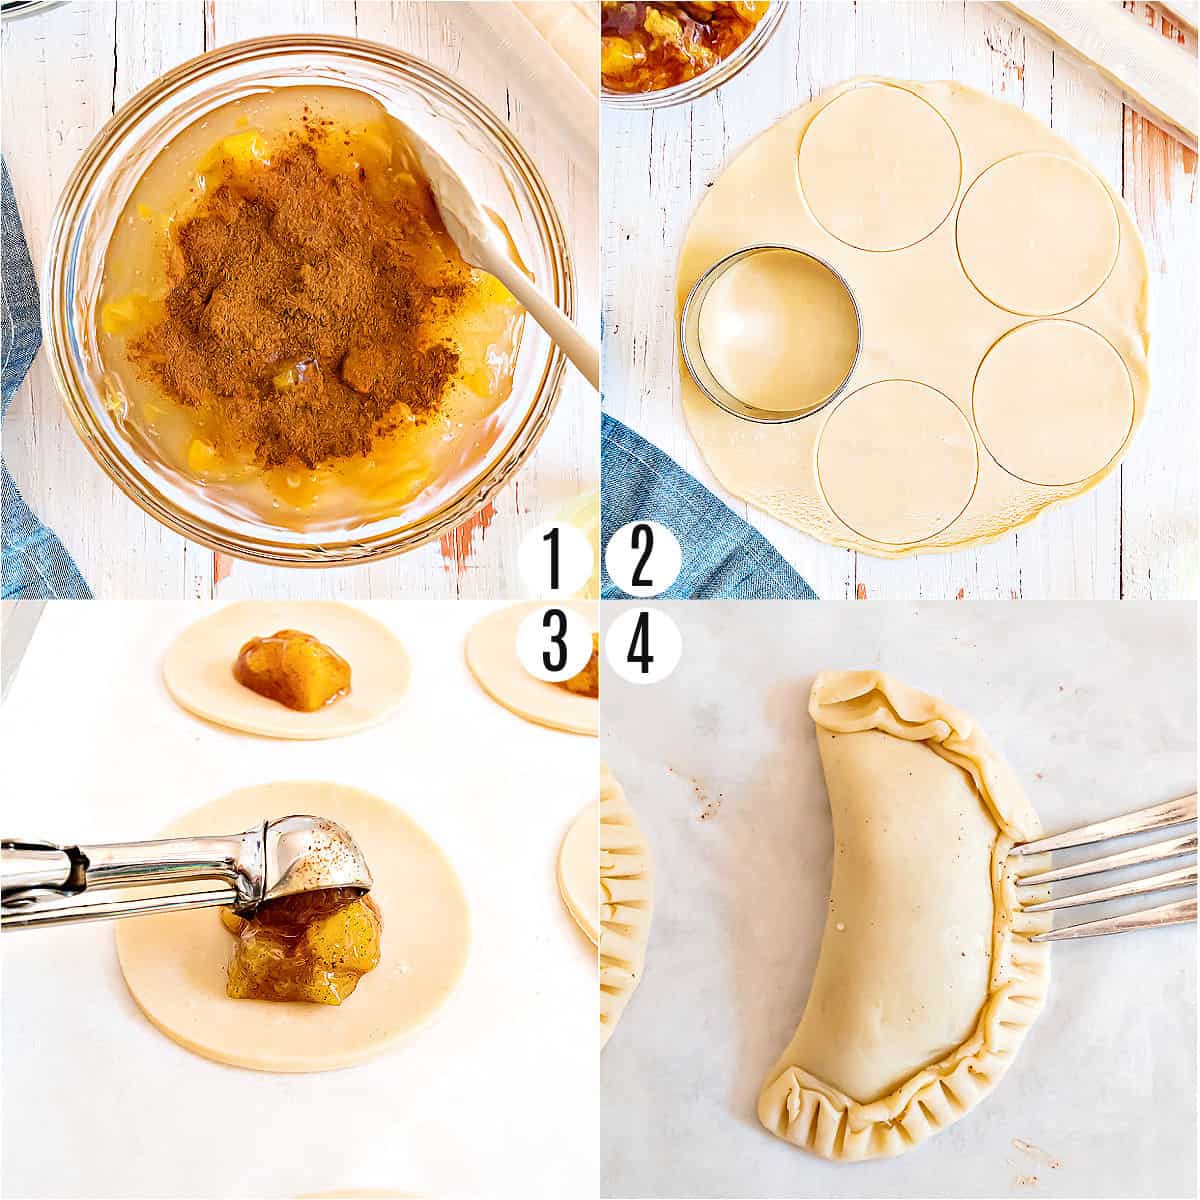 Step by step photos showing how to make peach hand pies.